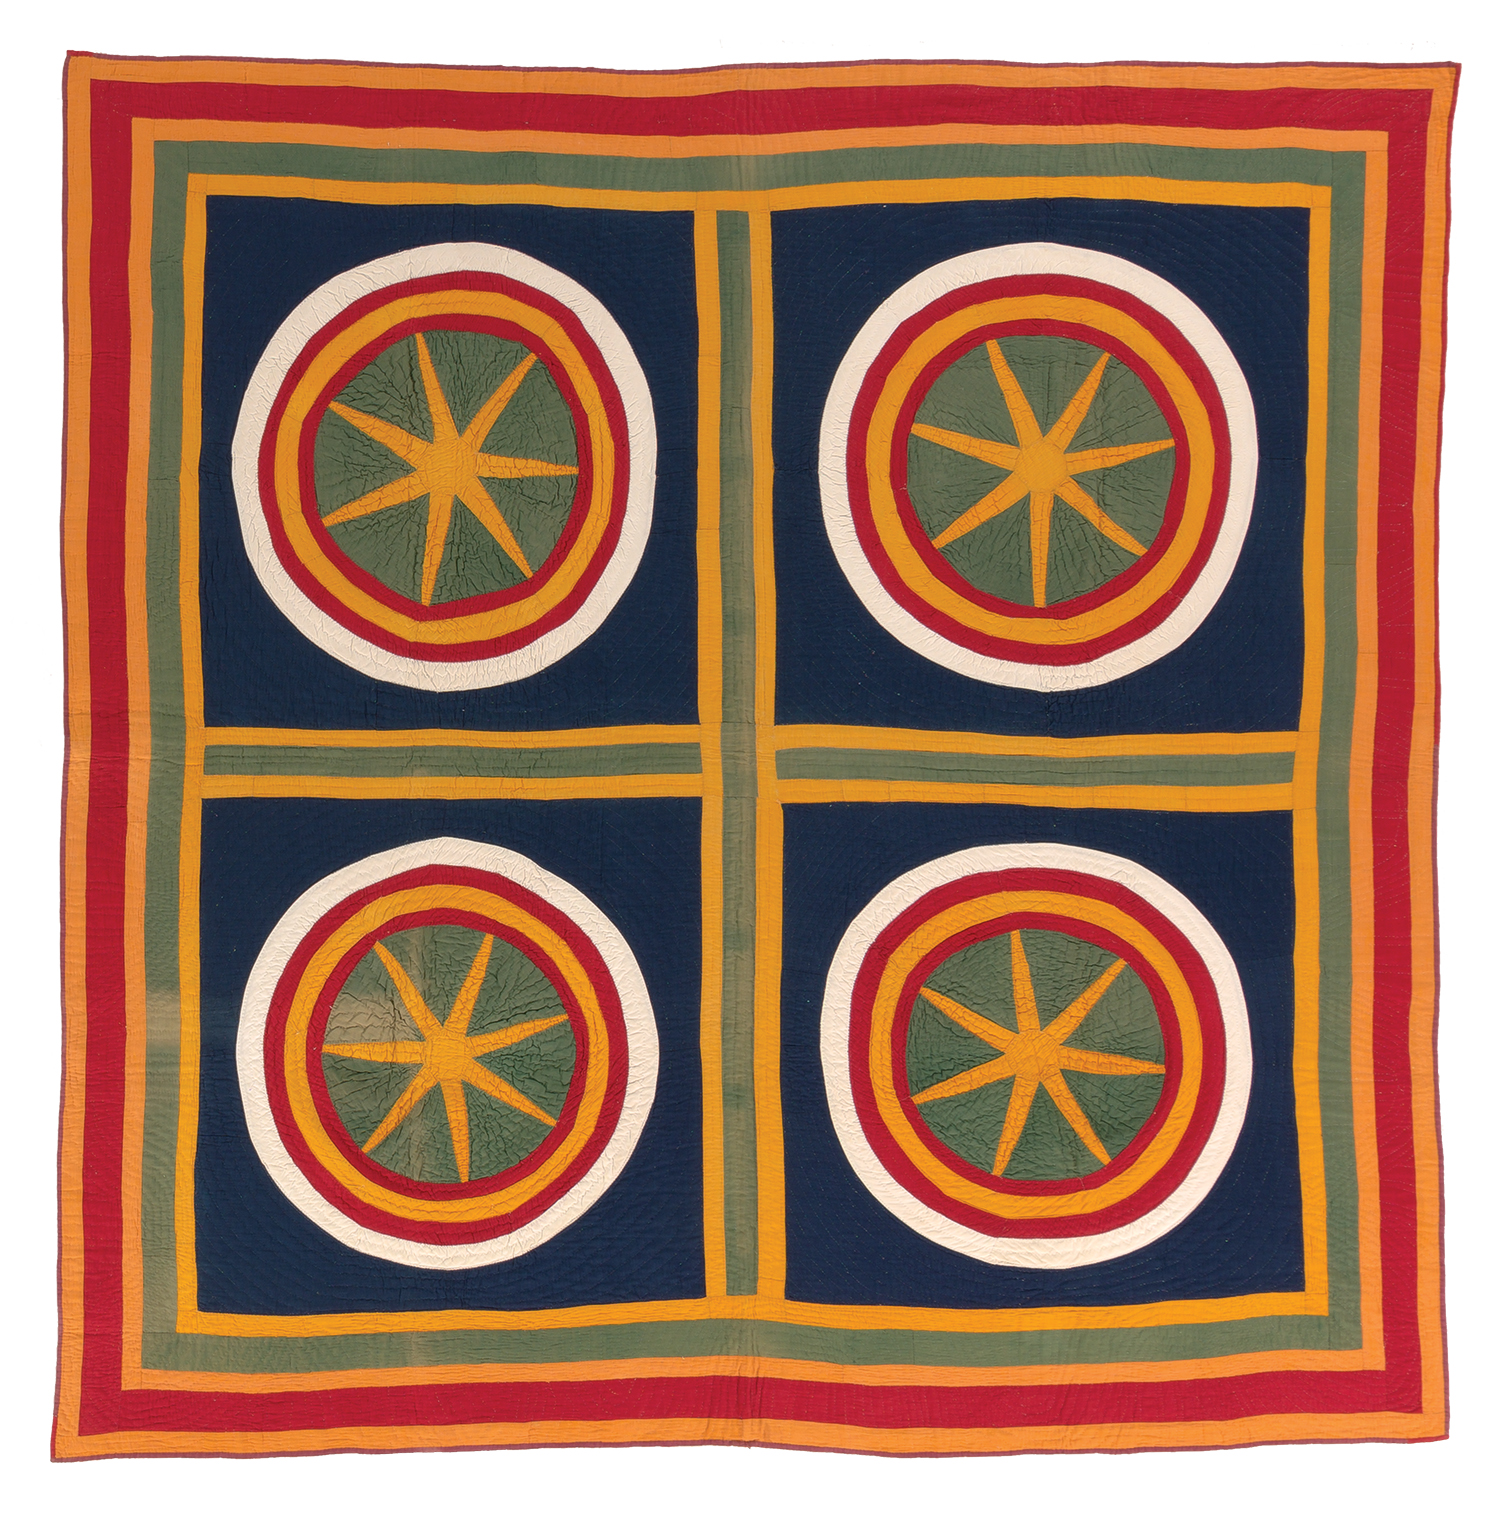 This Sand Dollars quilt, created by an unknown American maker circa 1880-1900, is one of 28 quilts from Ken Burns's private quilt collection appearing at the International Quilt Study Center & Museum.